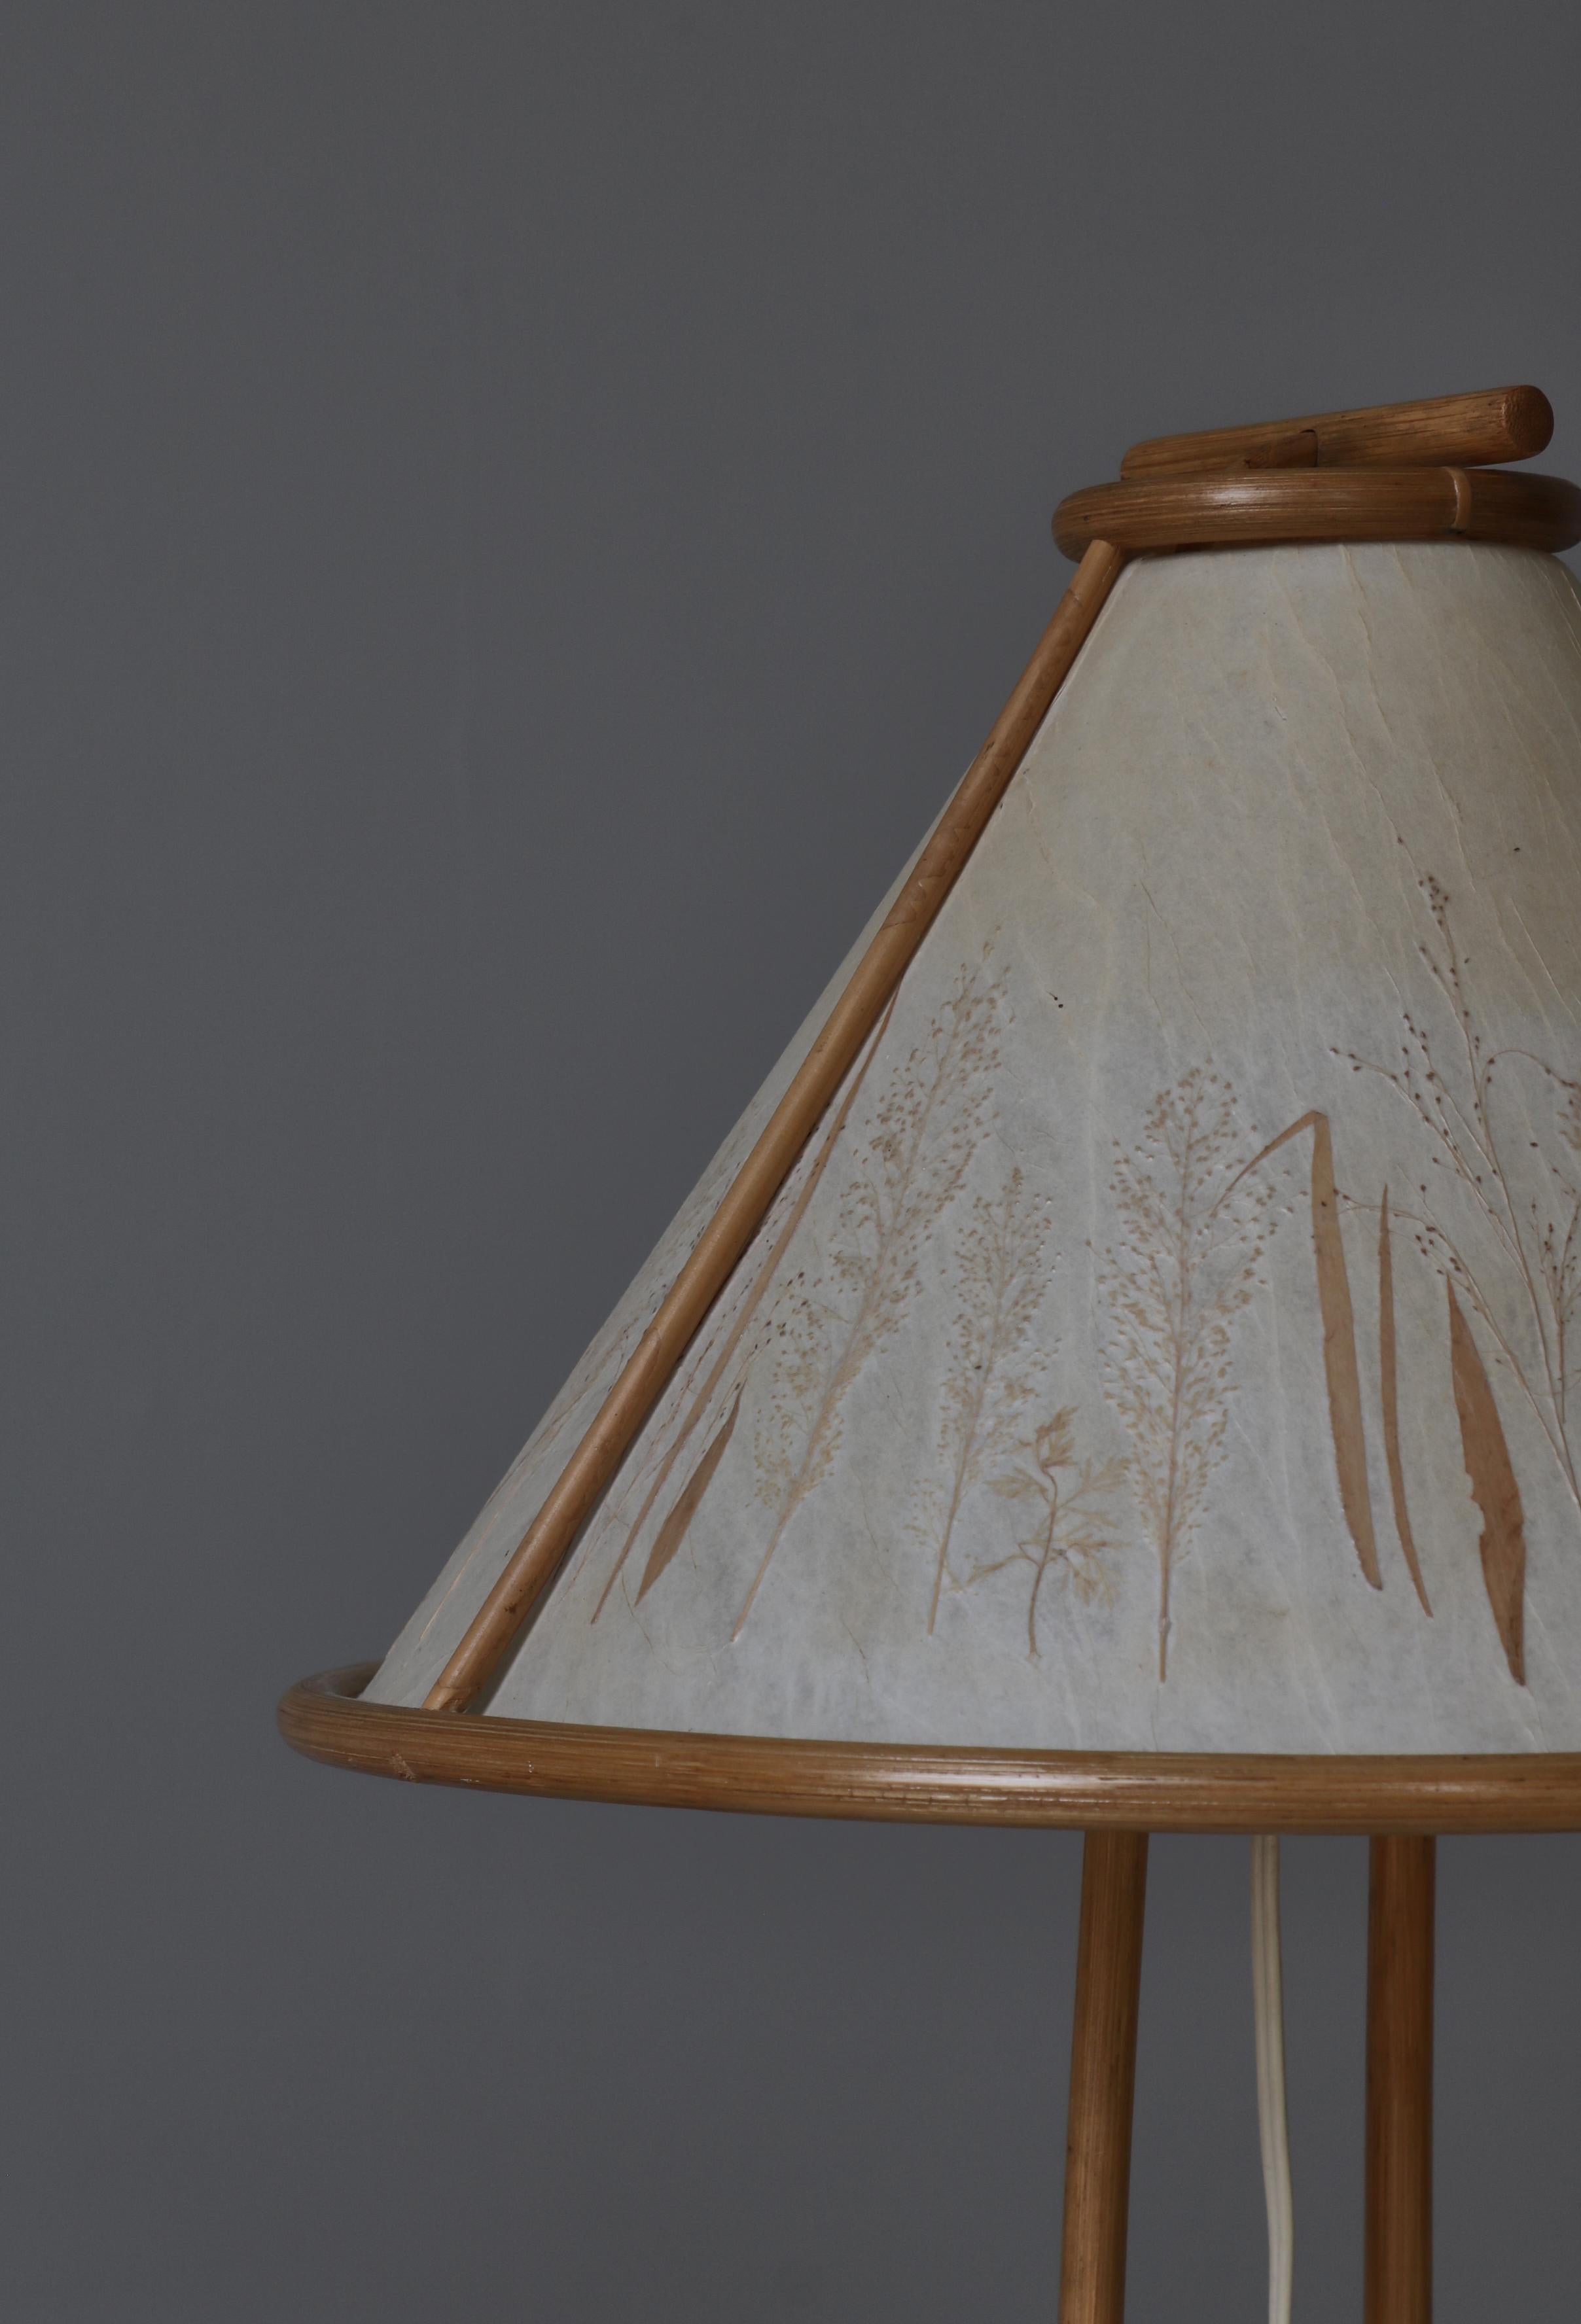 Mid-20th Century Scandinavian Wabi-Sabi Bamboo Table Lamp Shade with Pressed Plants, 1950s For Sale